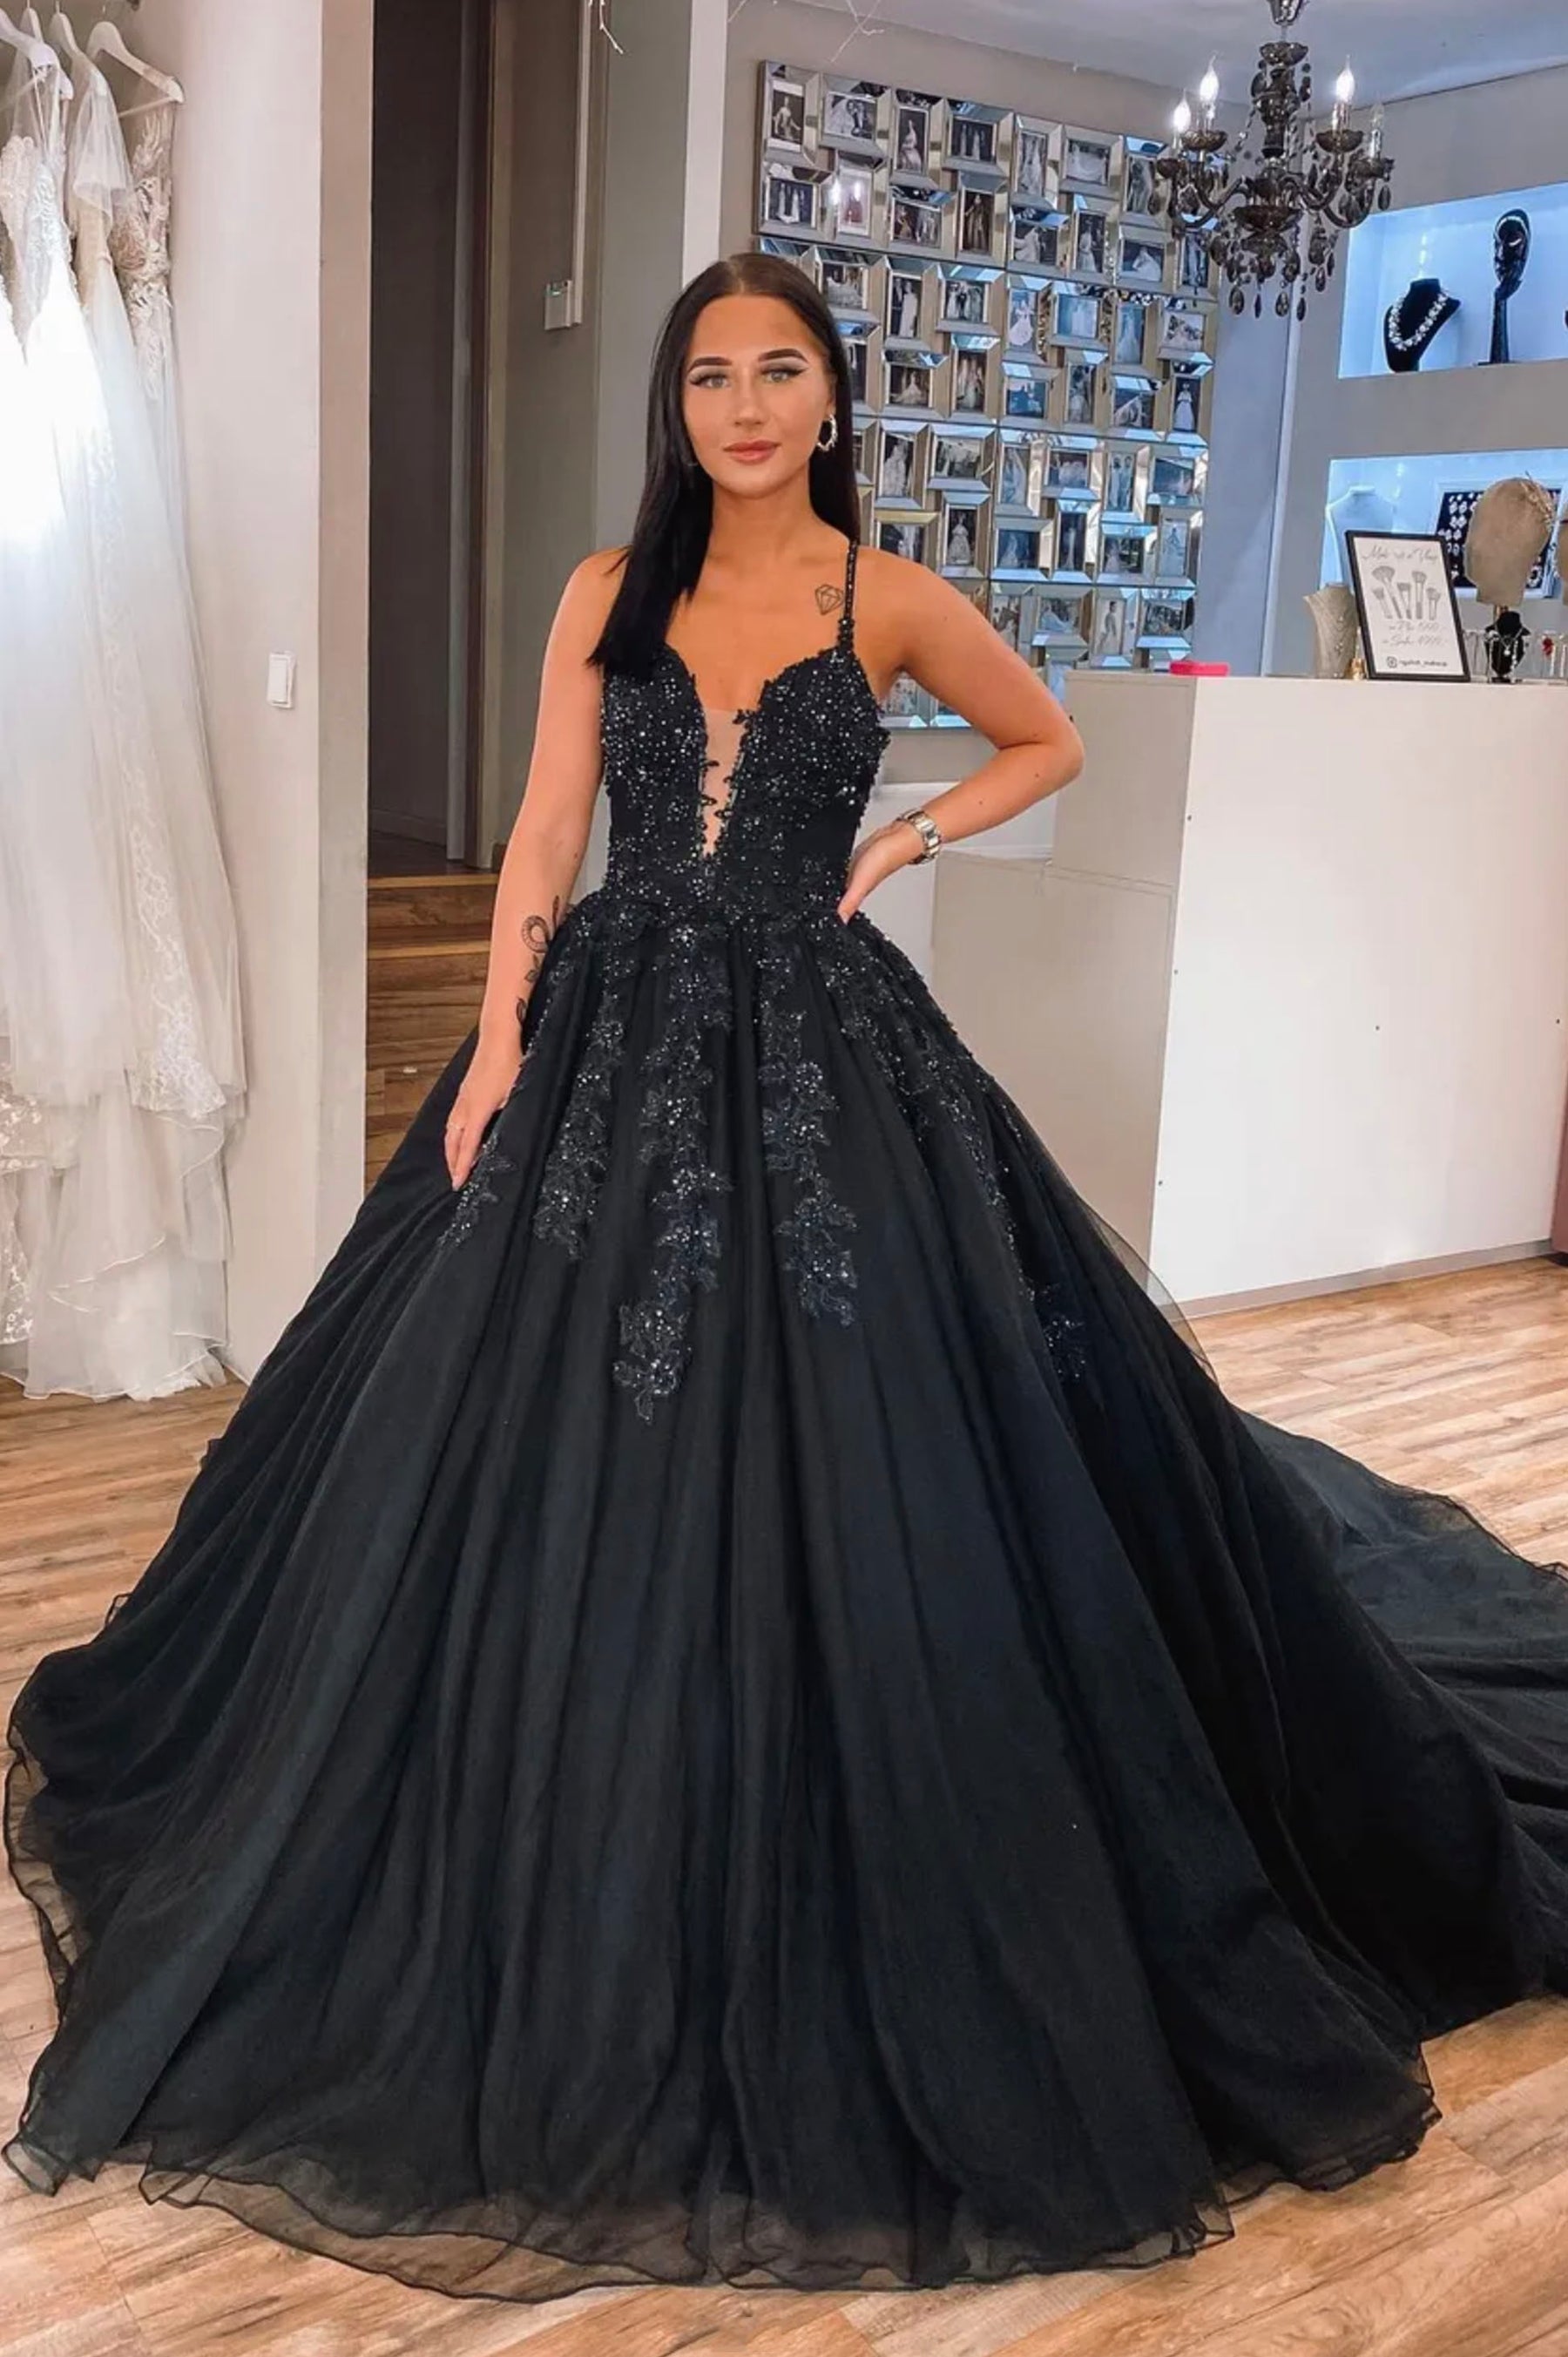 Share more than 210 black lace gown dress best